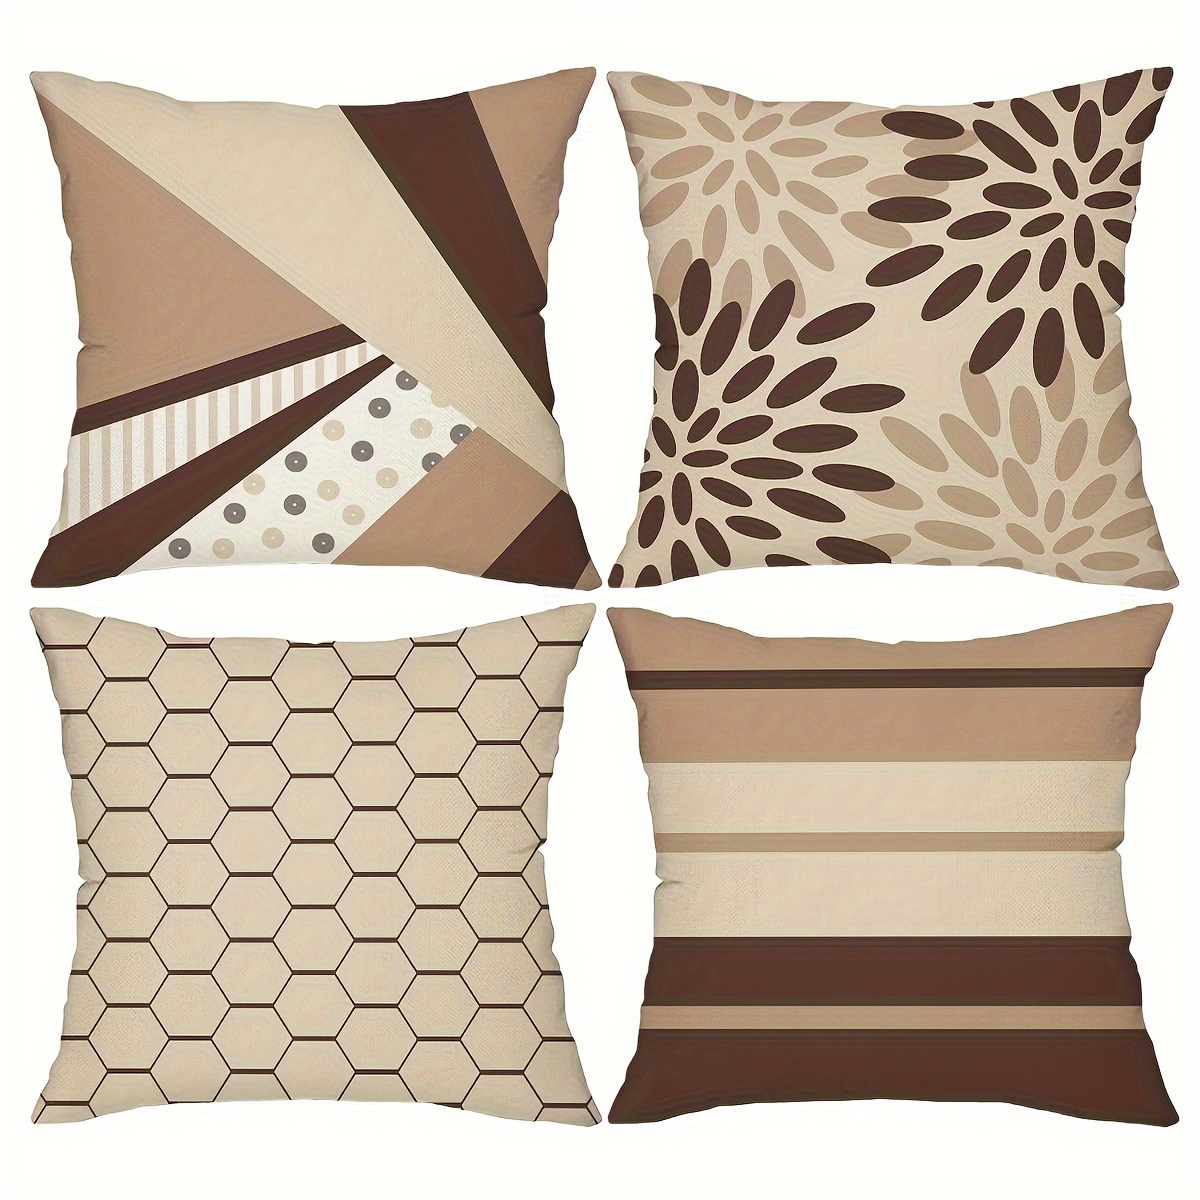 

4pcs, Boho Pillow Covers 18x18, Ethnic Design Decorative Throw Pillows Linen Blend Brown Geometry Pattern Farmhouse Cushion Pillow Covers For Sofa Couch Outdoor